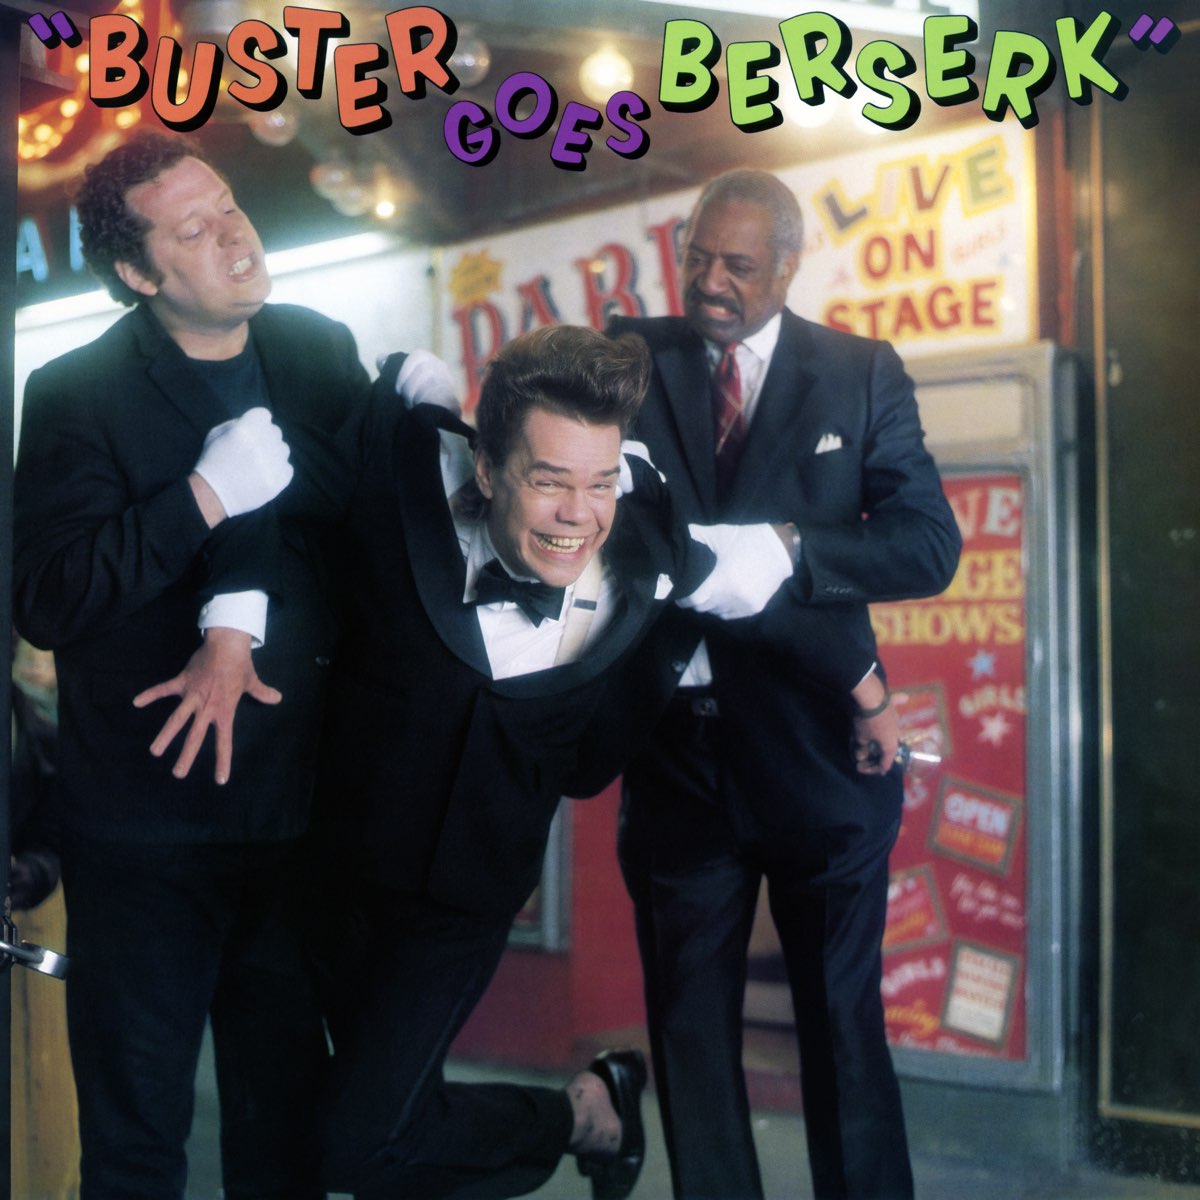 Buster Poindexter группа дискография. Песни Бастер. Buster Poindexter and his Banshees of Blue. Buster goes to. Бастерс песни